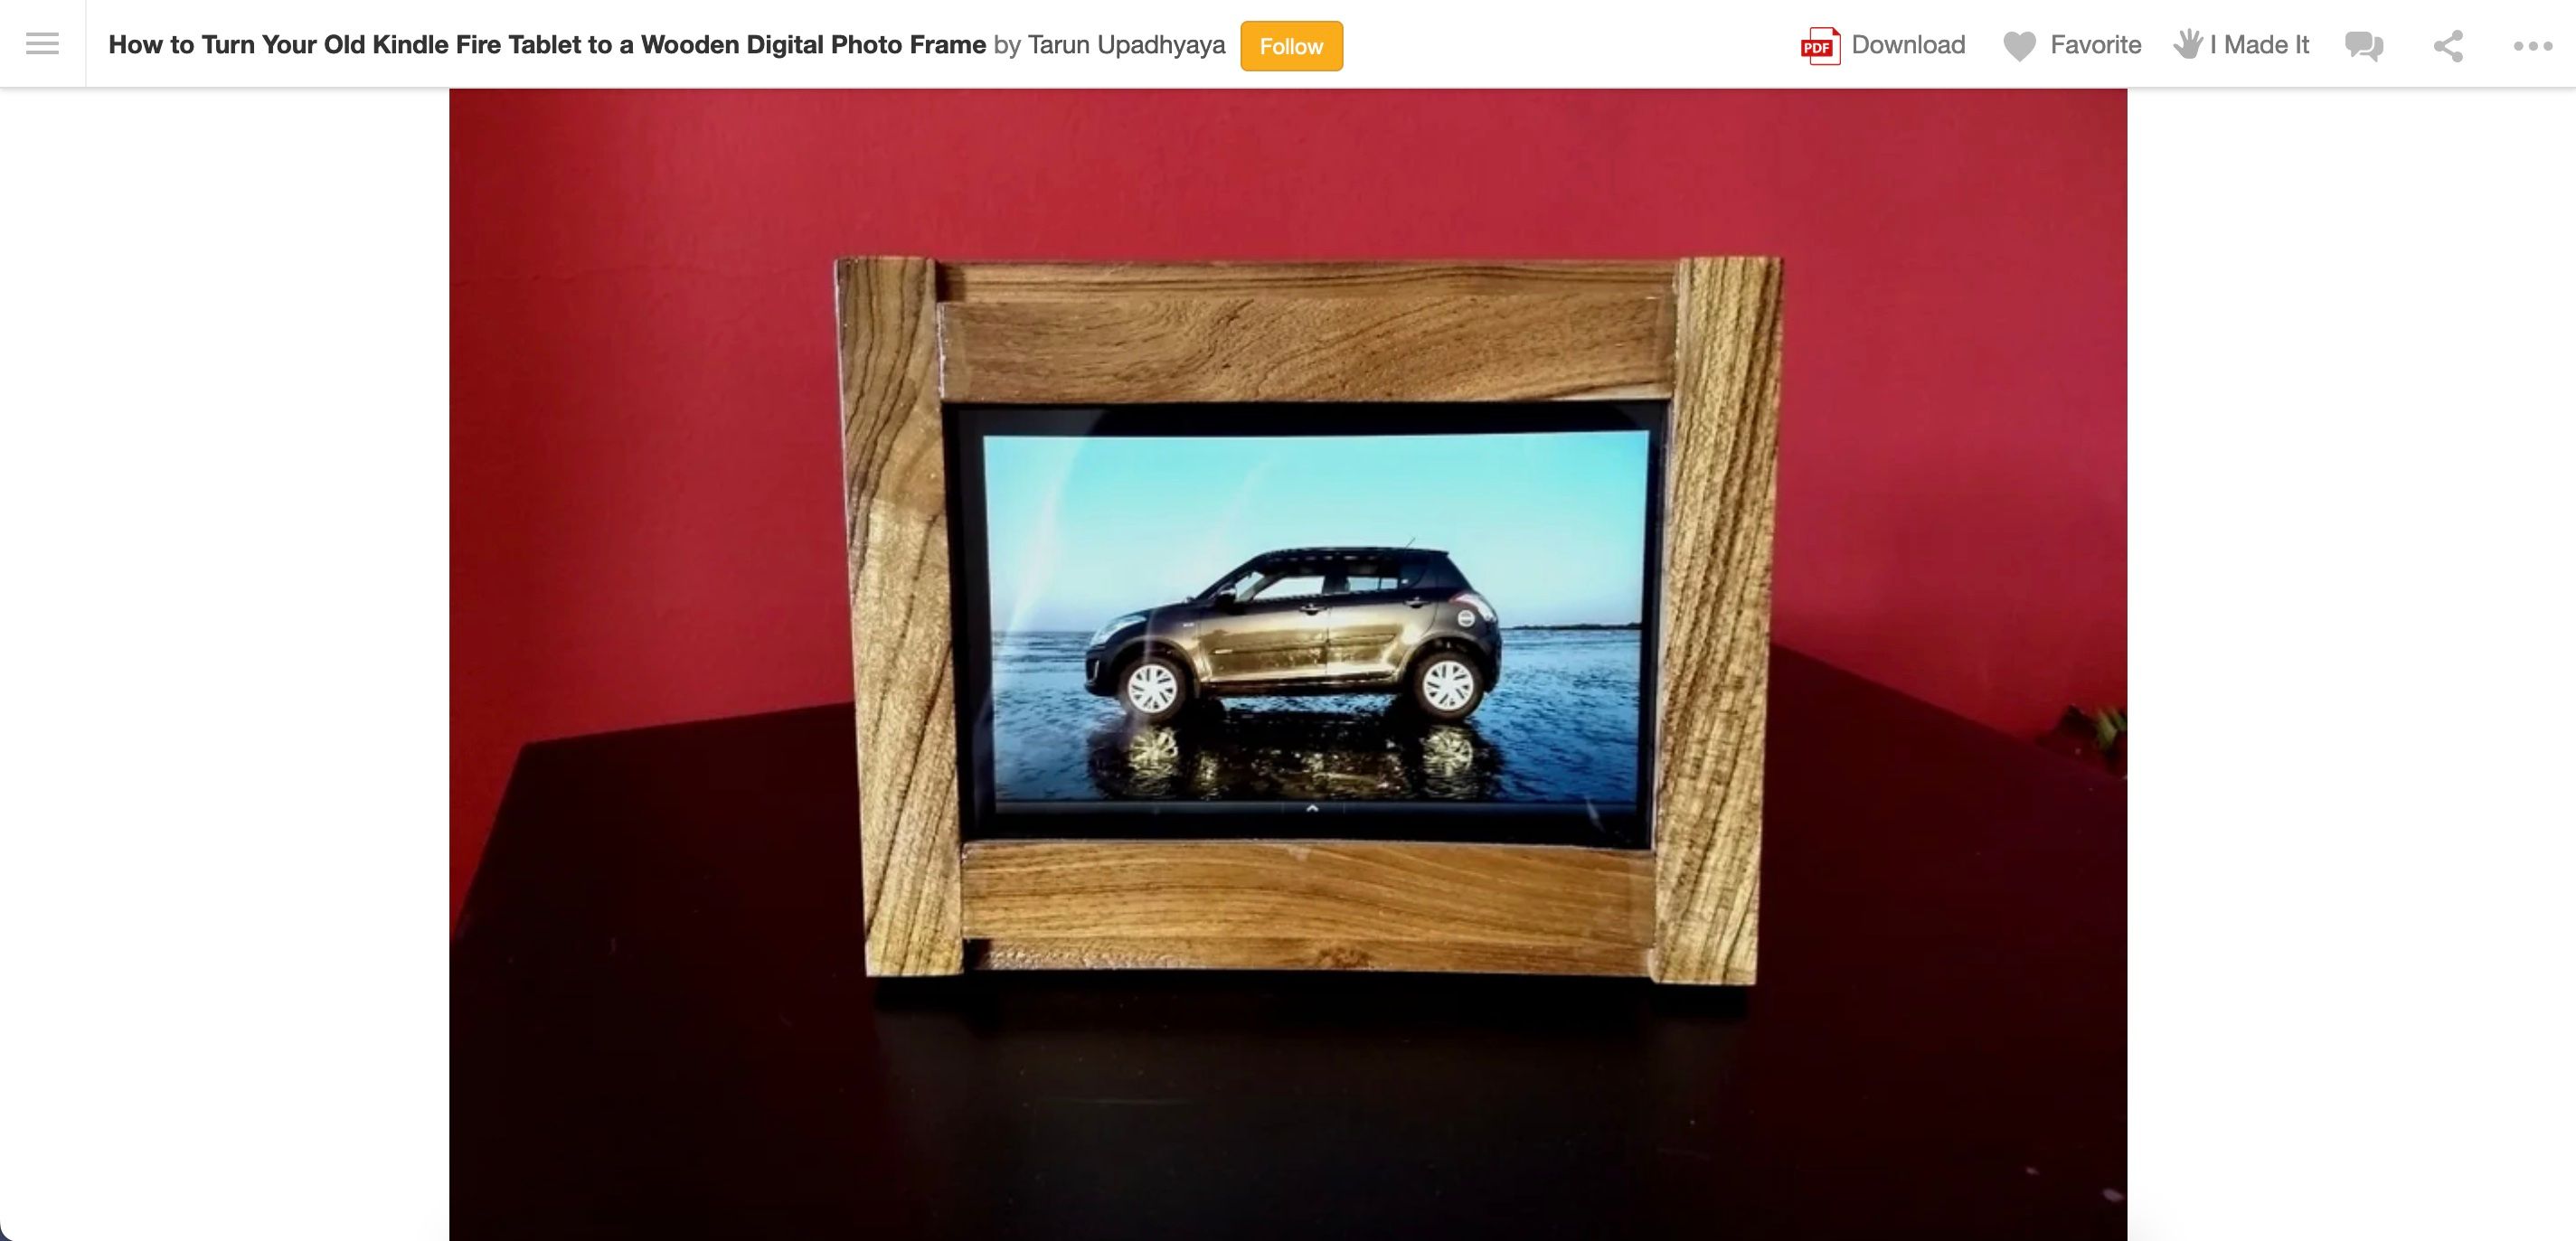 A digital picture frame made using an old Kindle Fire and wood for the frame. 